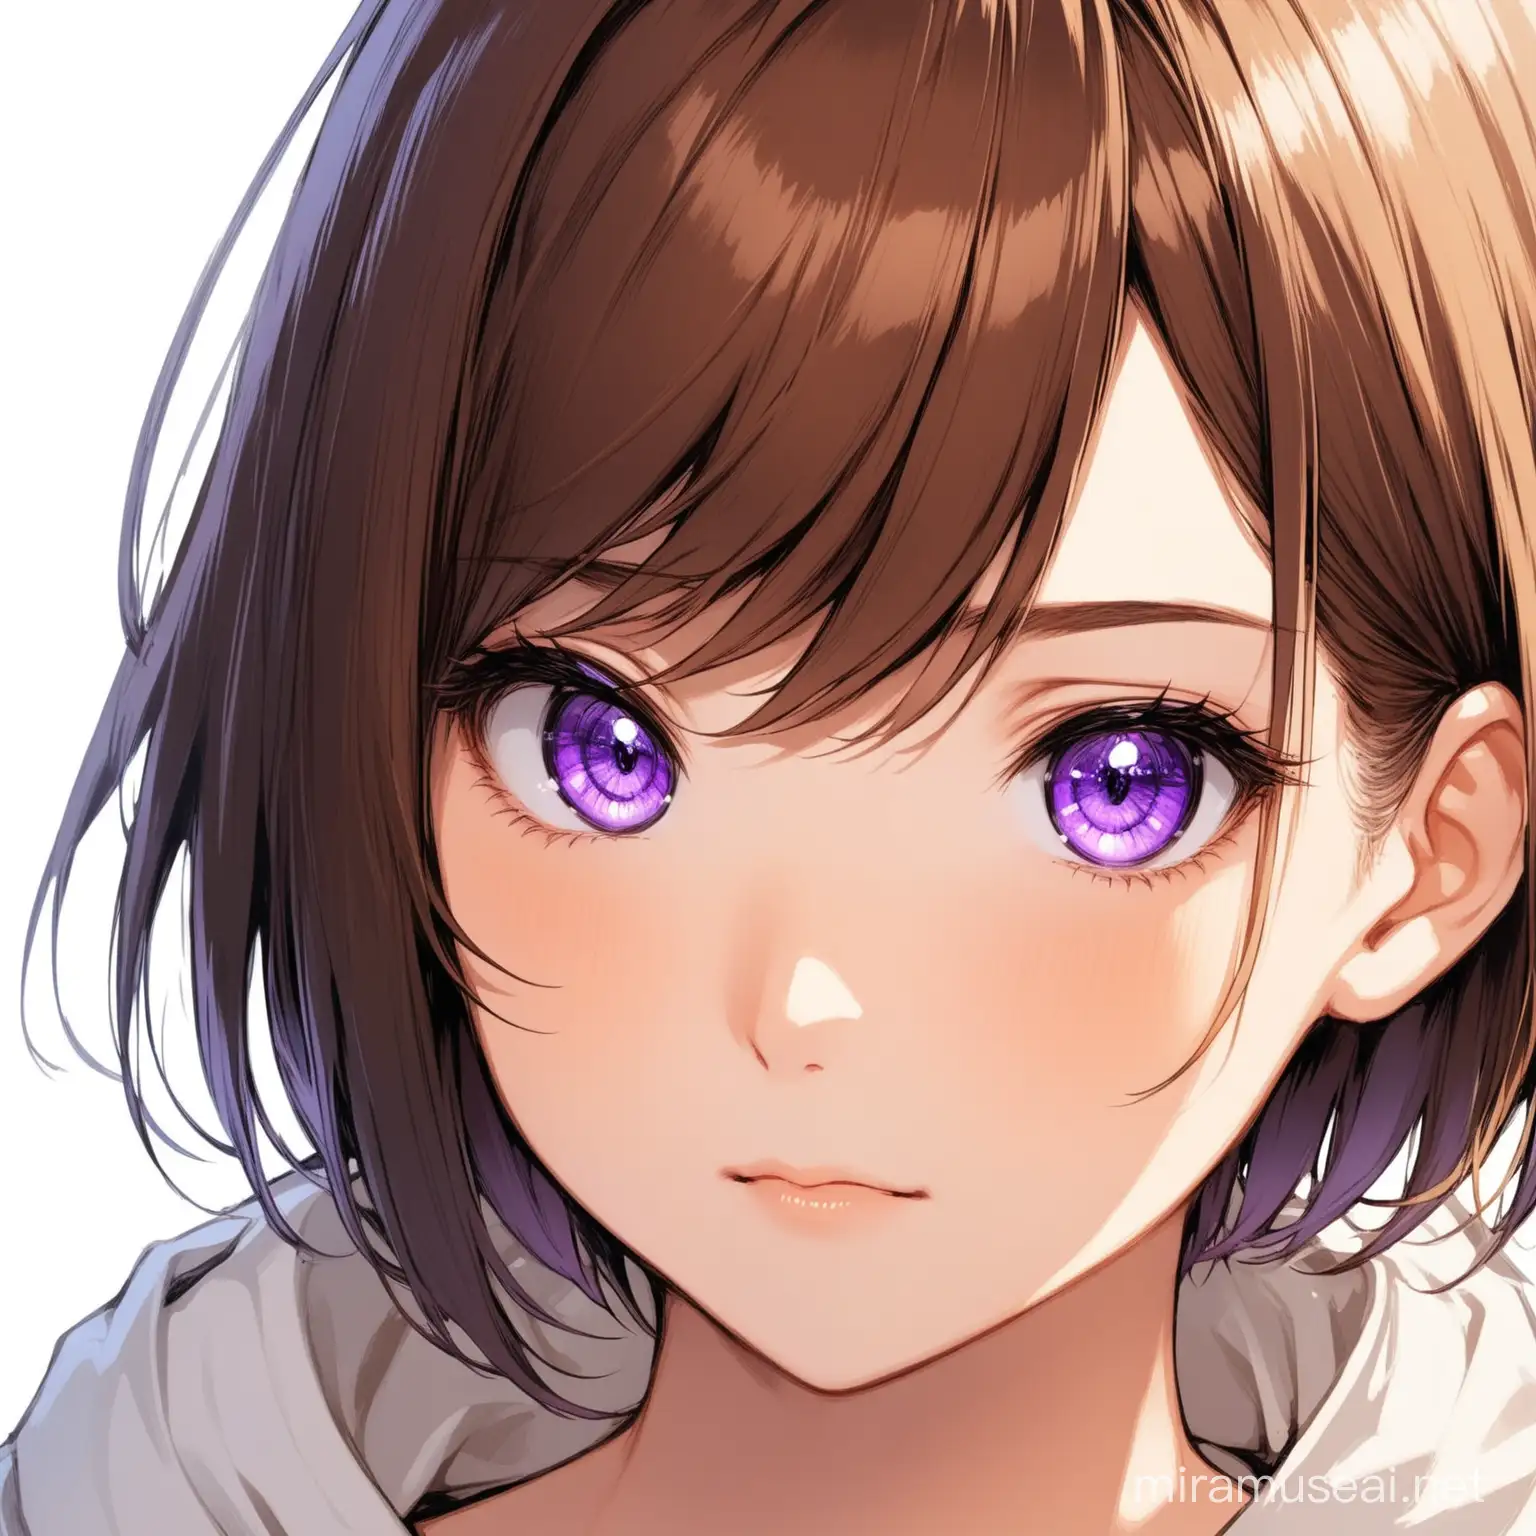 CloseUp View of a Girl with Short Brown Hair and Purple Eyes